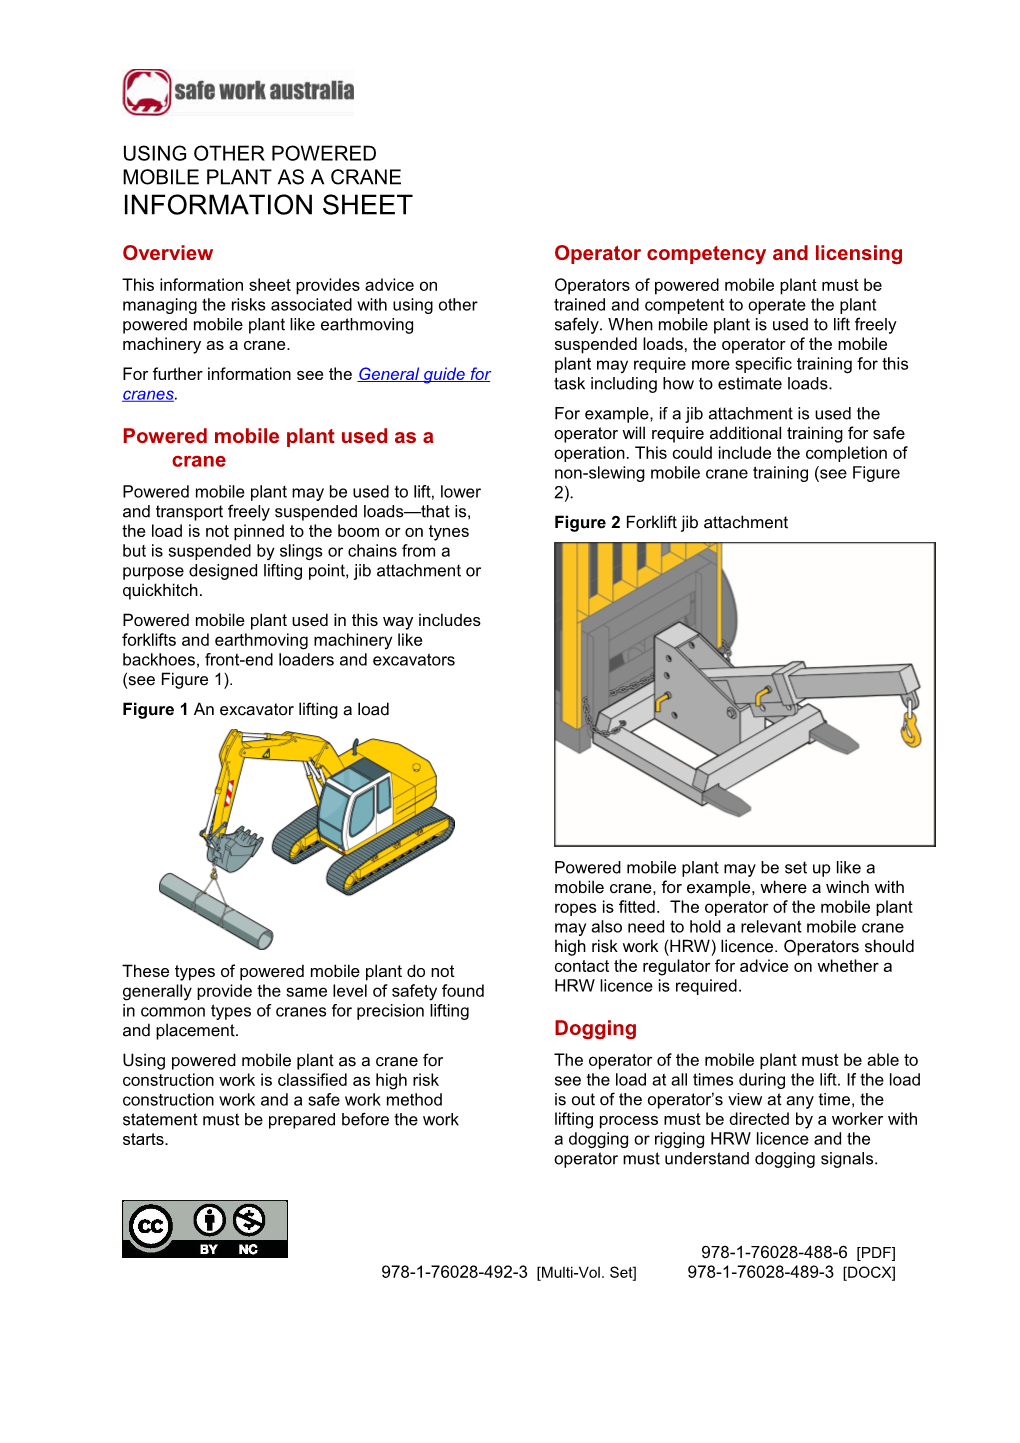 10. Using Other Powered Mobile Plant As a Crane Information Sheet